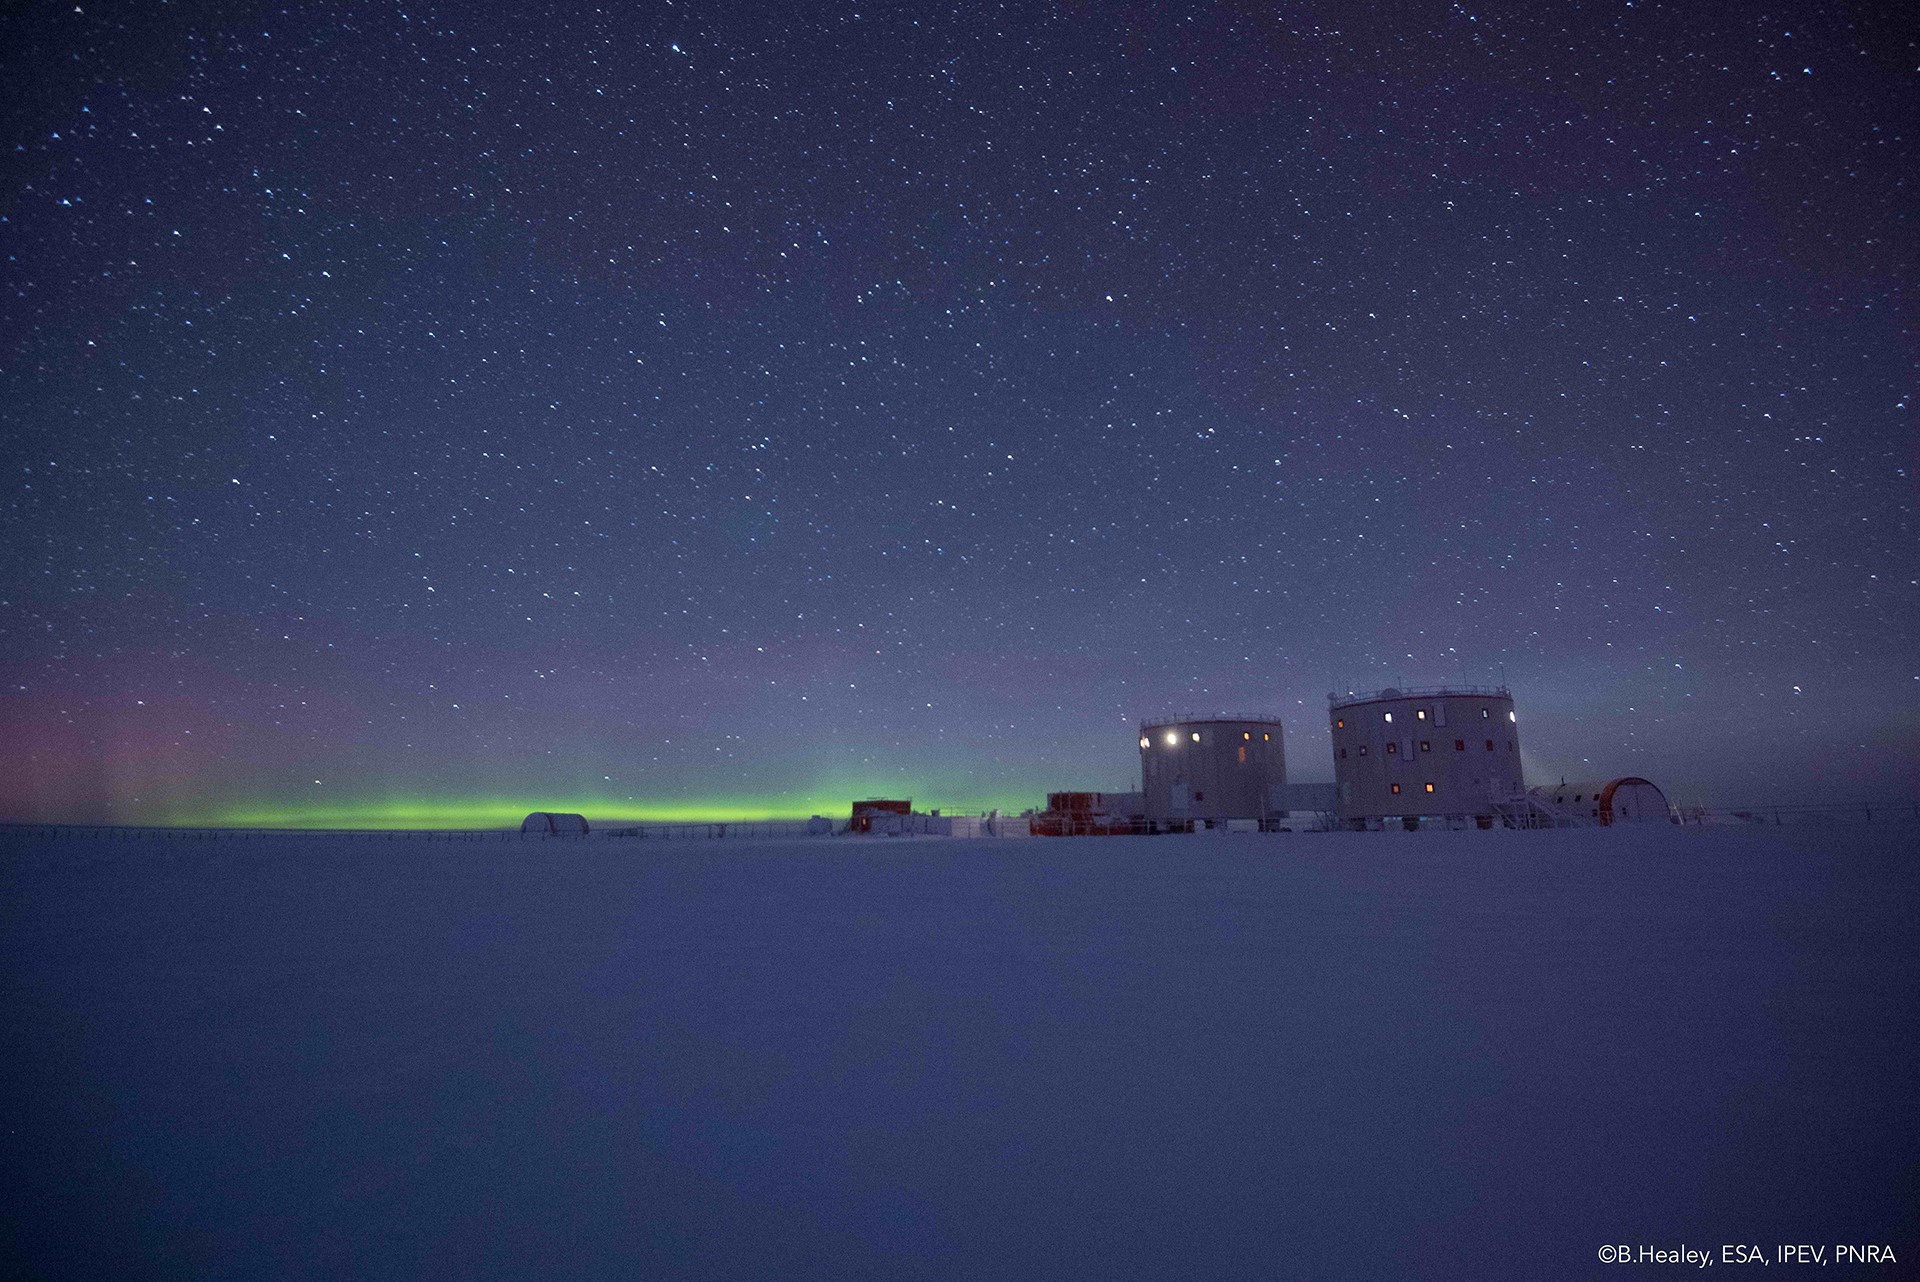 General 1920x1282 nature landscape night lights stars Concordia Research Station Antarctica snow cold building science technology aurorae